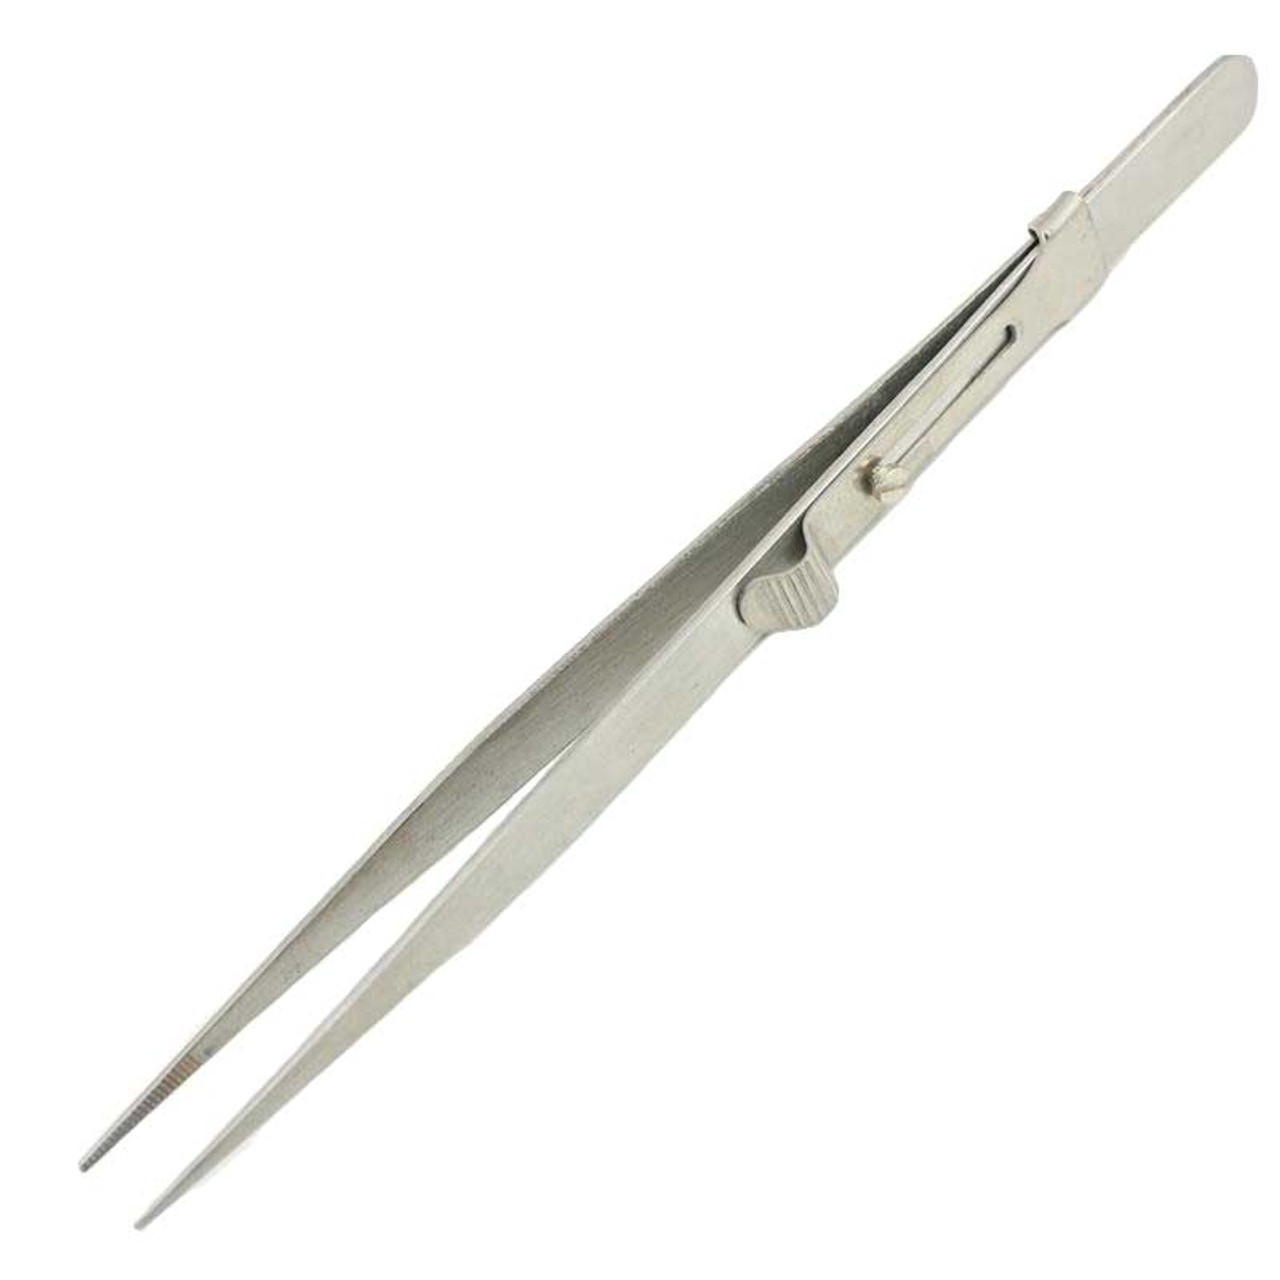 DELUXE Stainless Tweezers 6 Serrated, Angled. For Industrial and Home  Sewing, craft, jewelry, and more. IDS, International Design Supplies TW6